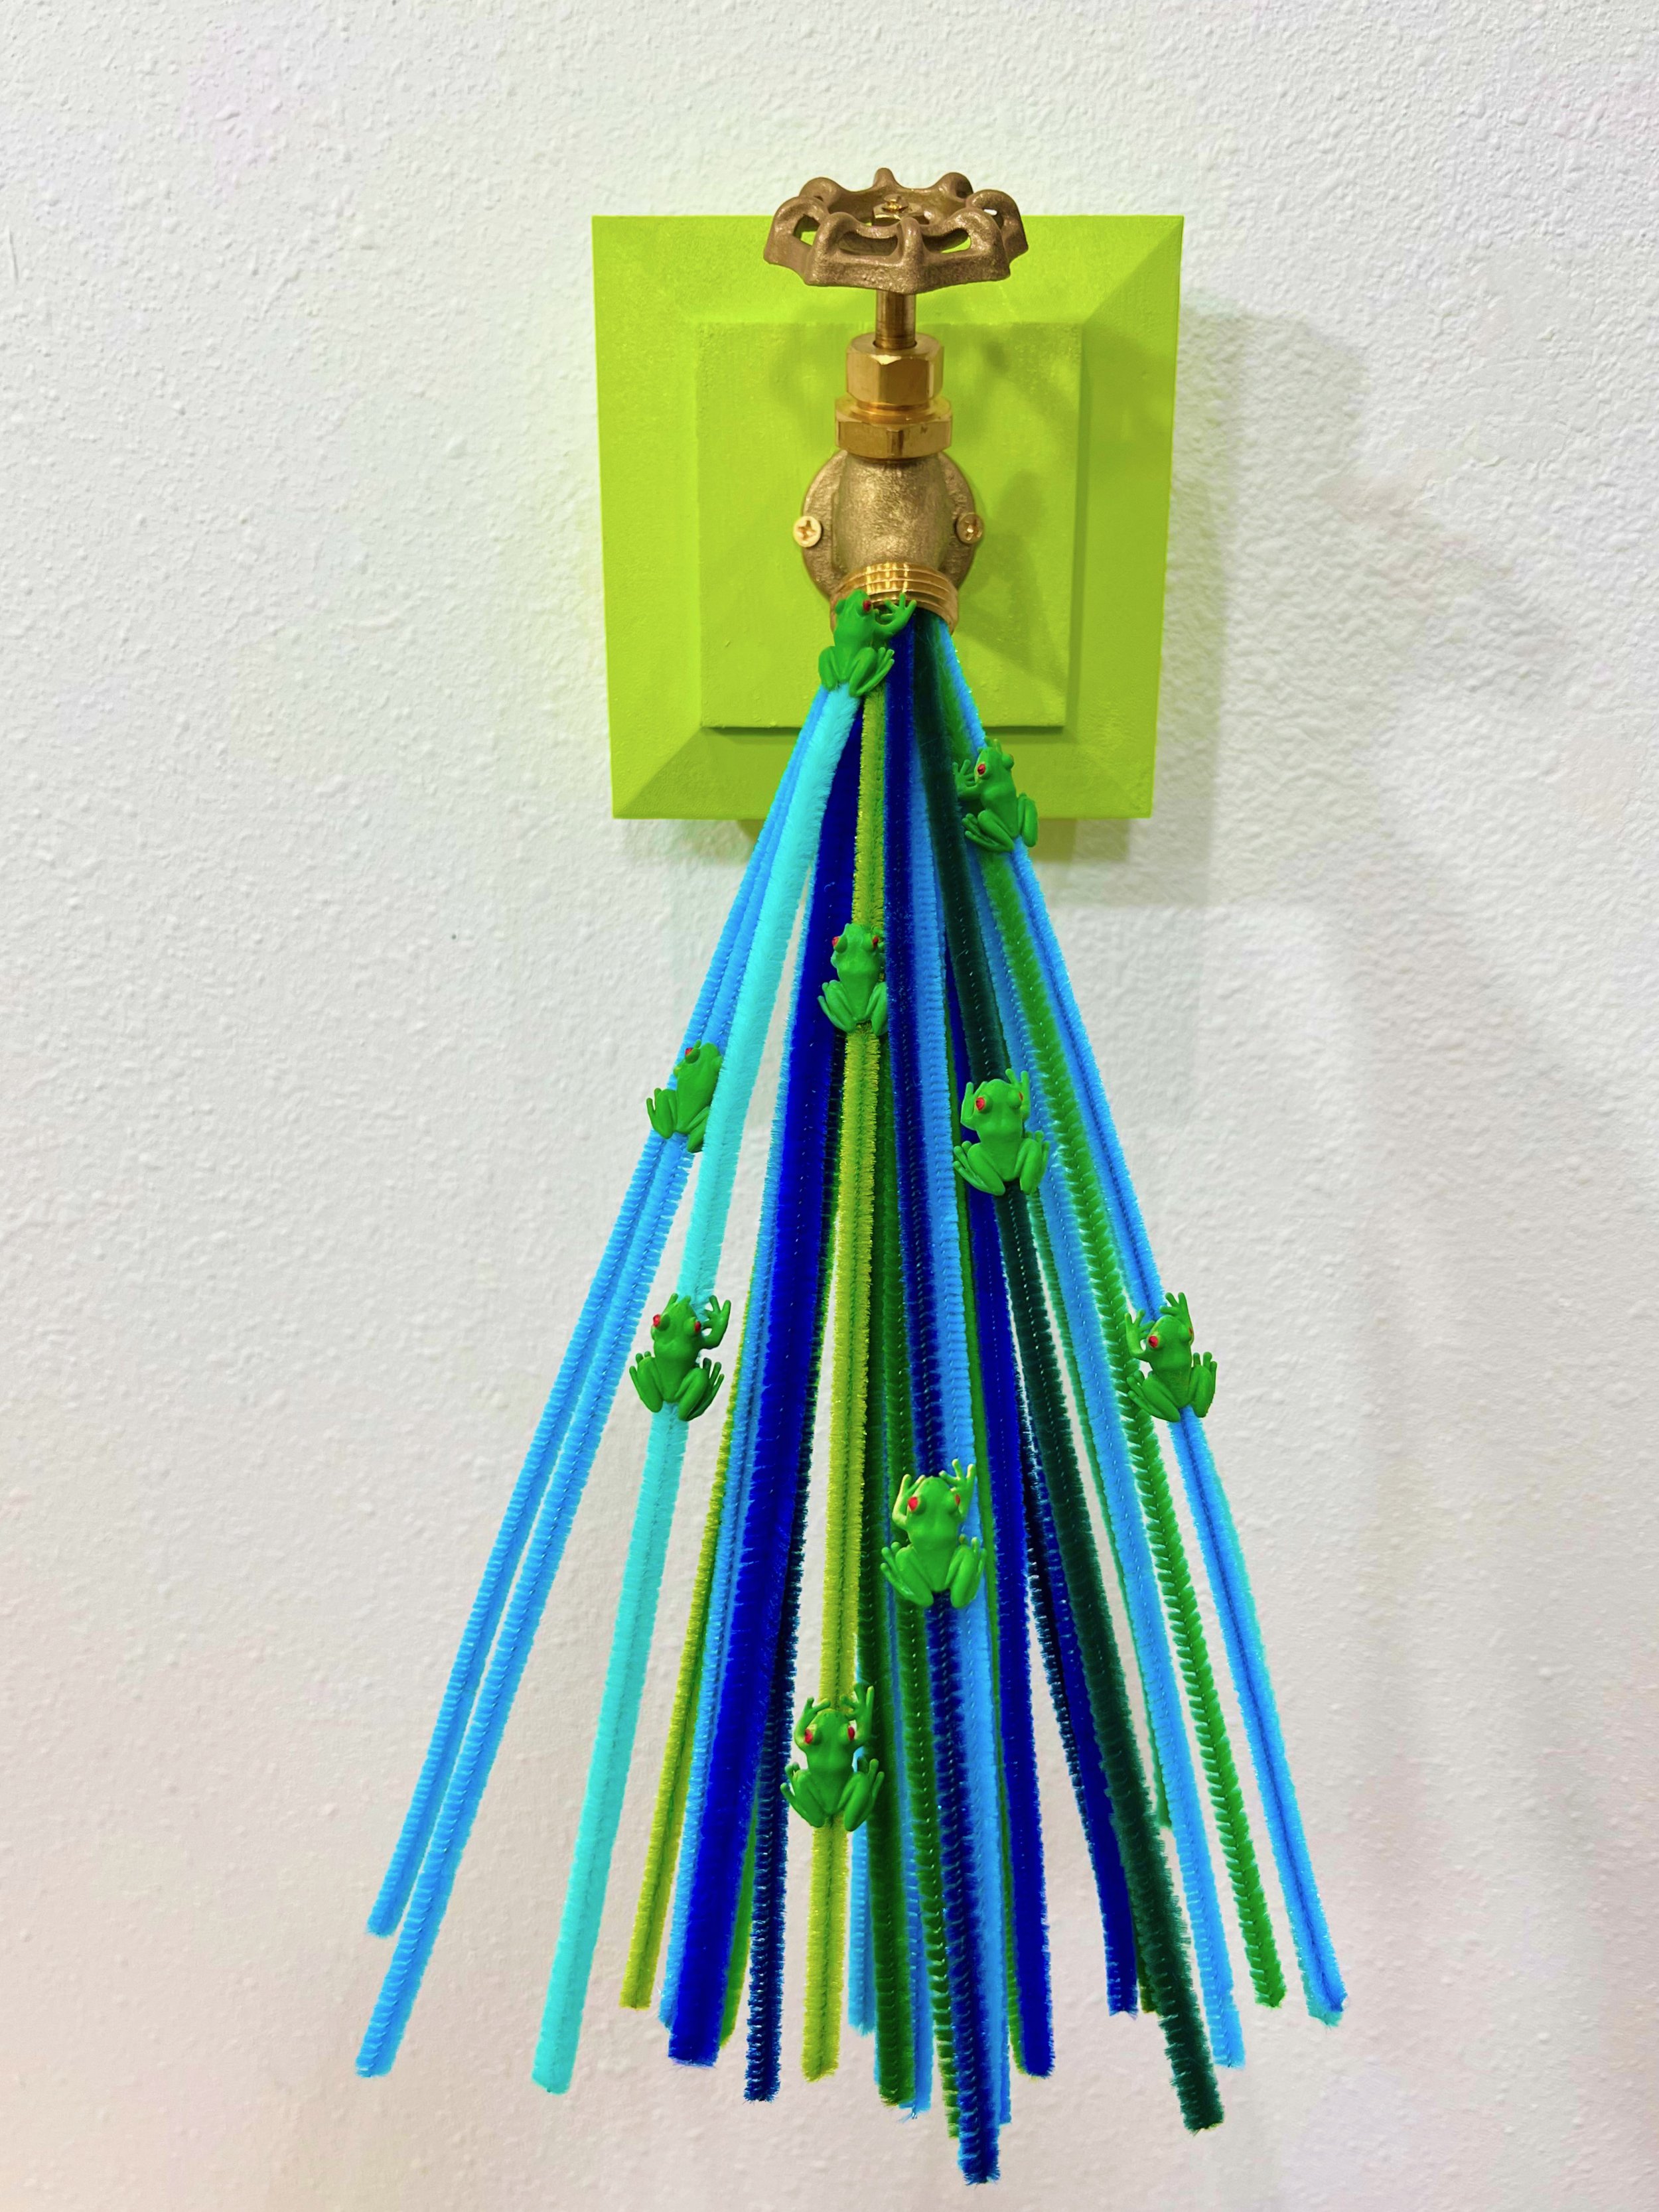 3a-Hallie-Rae-Ward-GREEN FROGS-Art-For-The-People-Gallery-Austin-Art-Gallery-Local-Art.jpeg